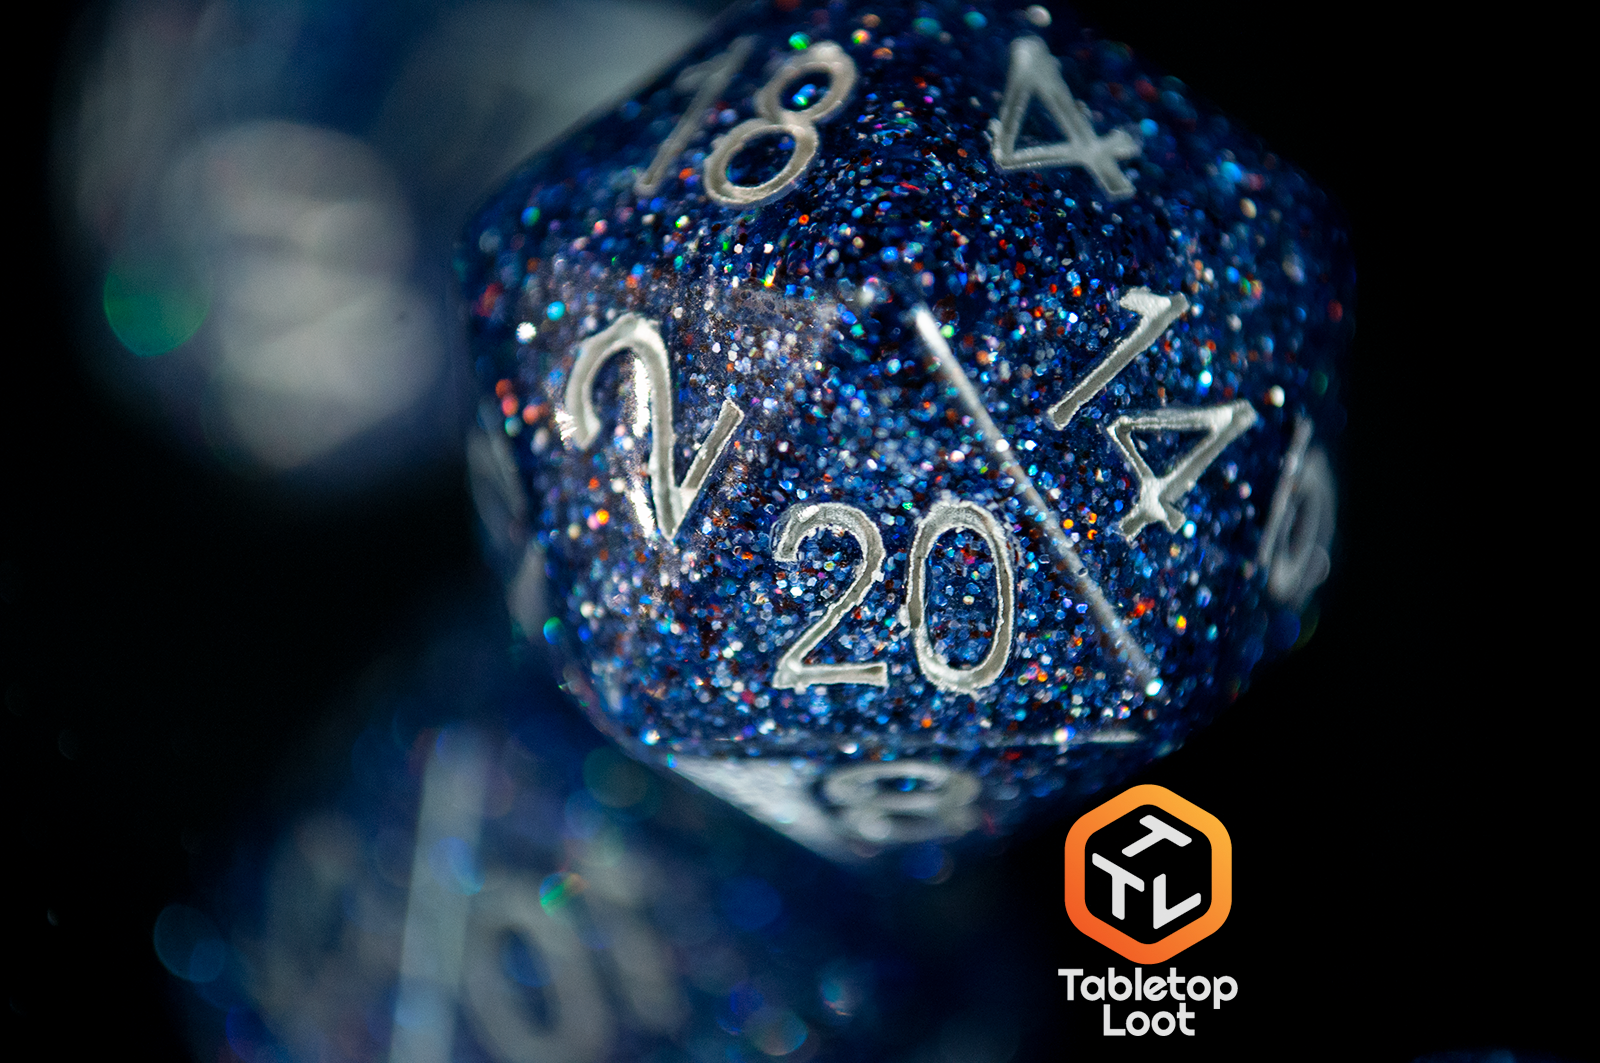 A close up of the D10 from the Starry Form 7 piece dice set from Tabletop Loot packed with blue glitter and silver numbering.